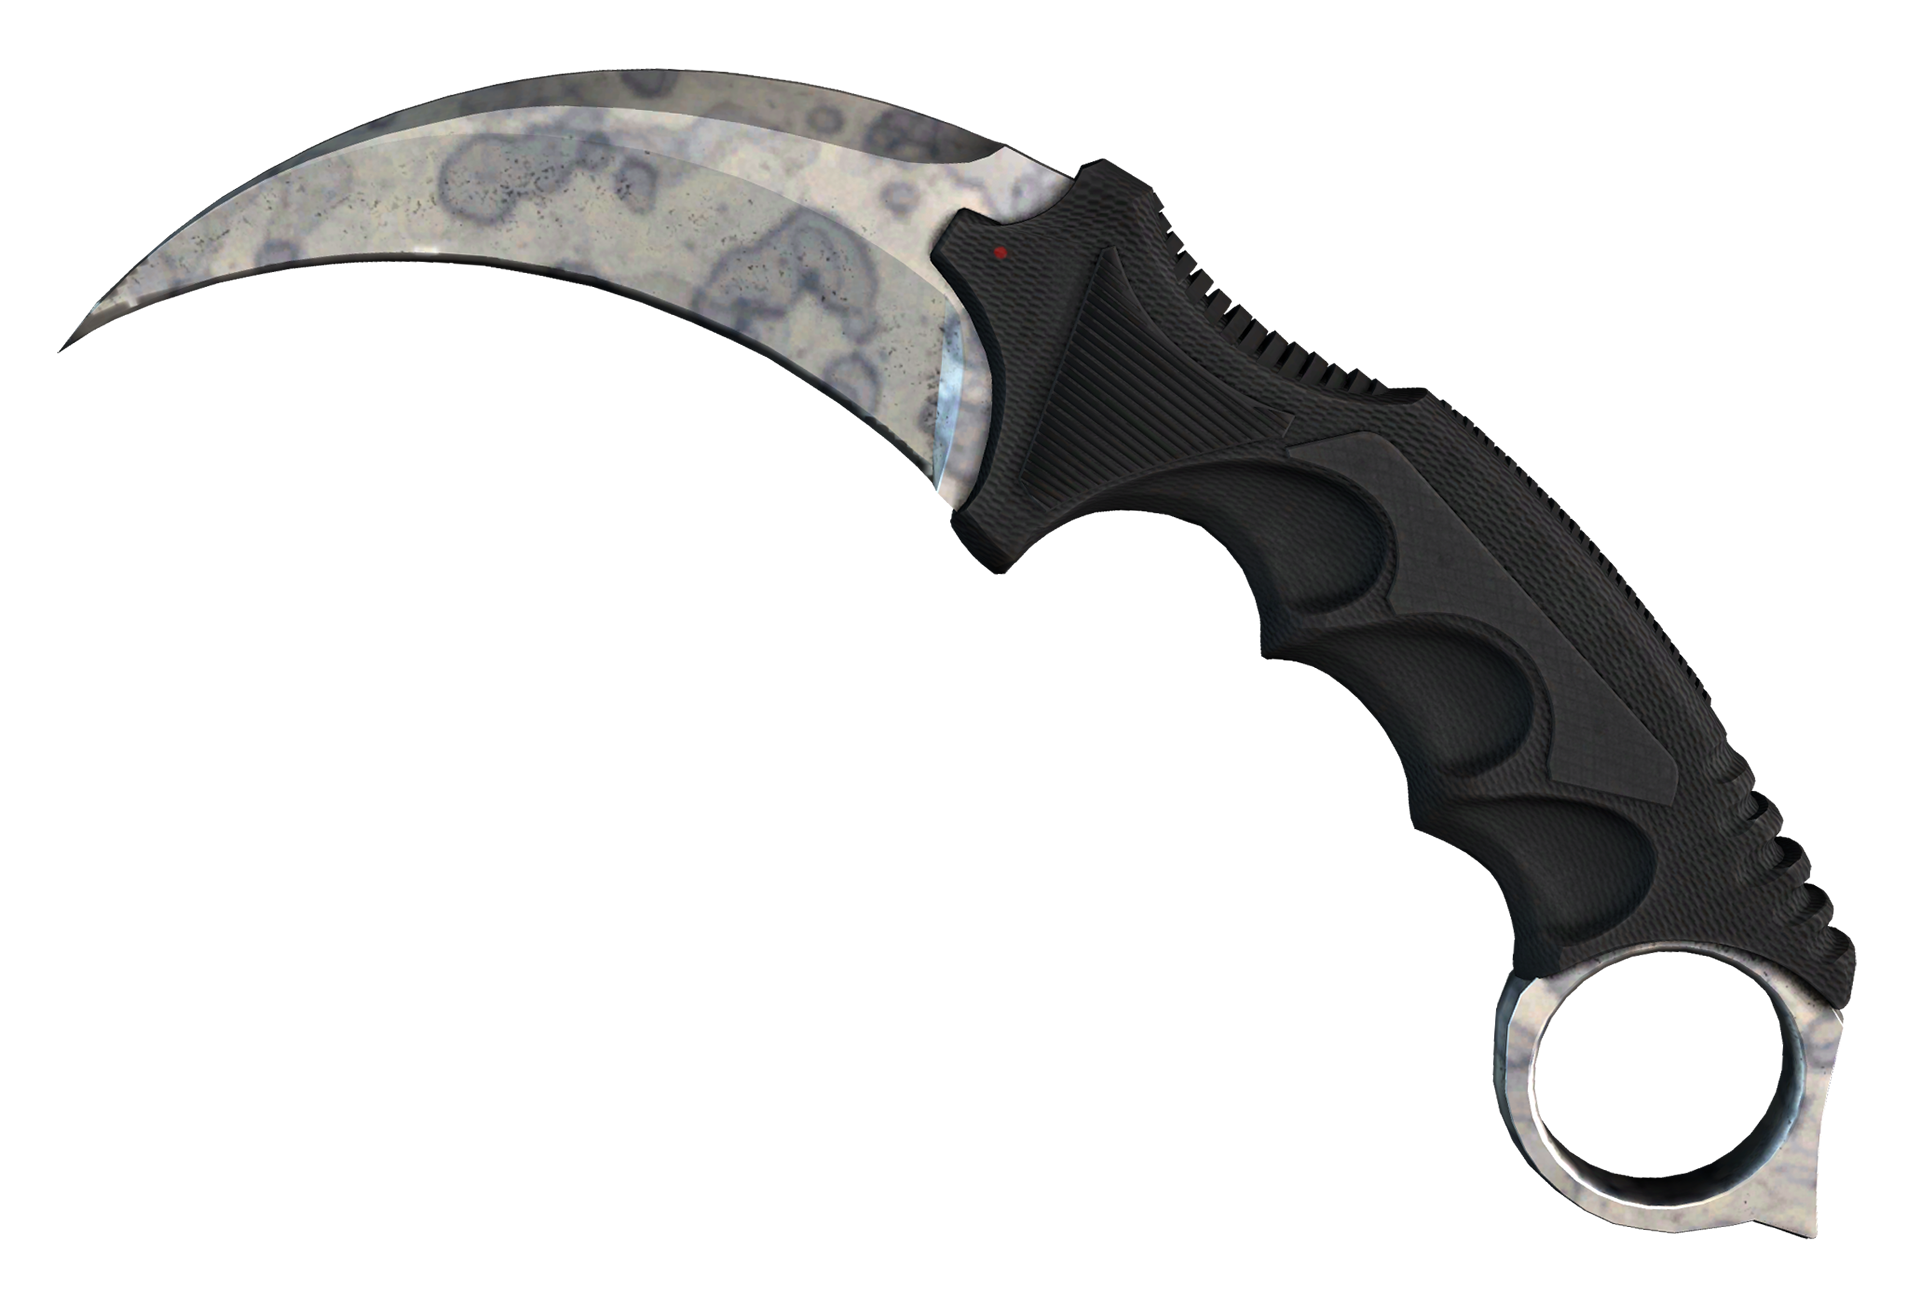 Dual Berettas Stained cs go skin download the new